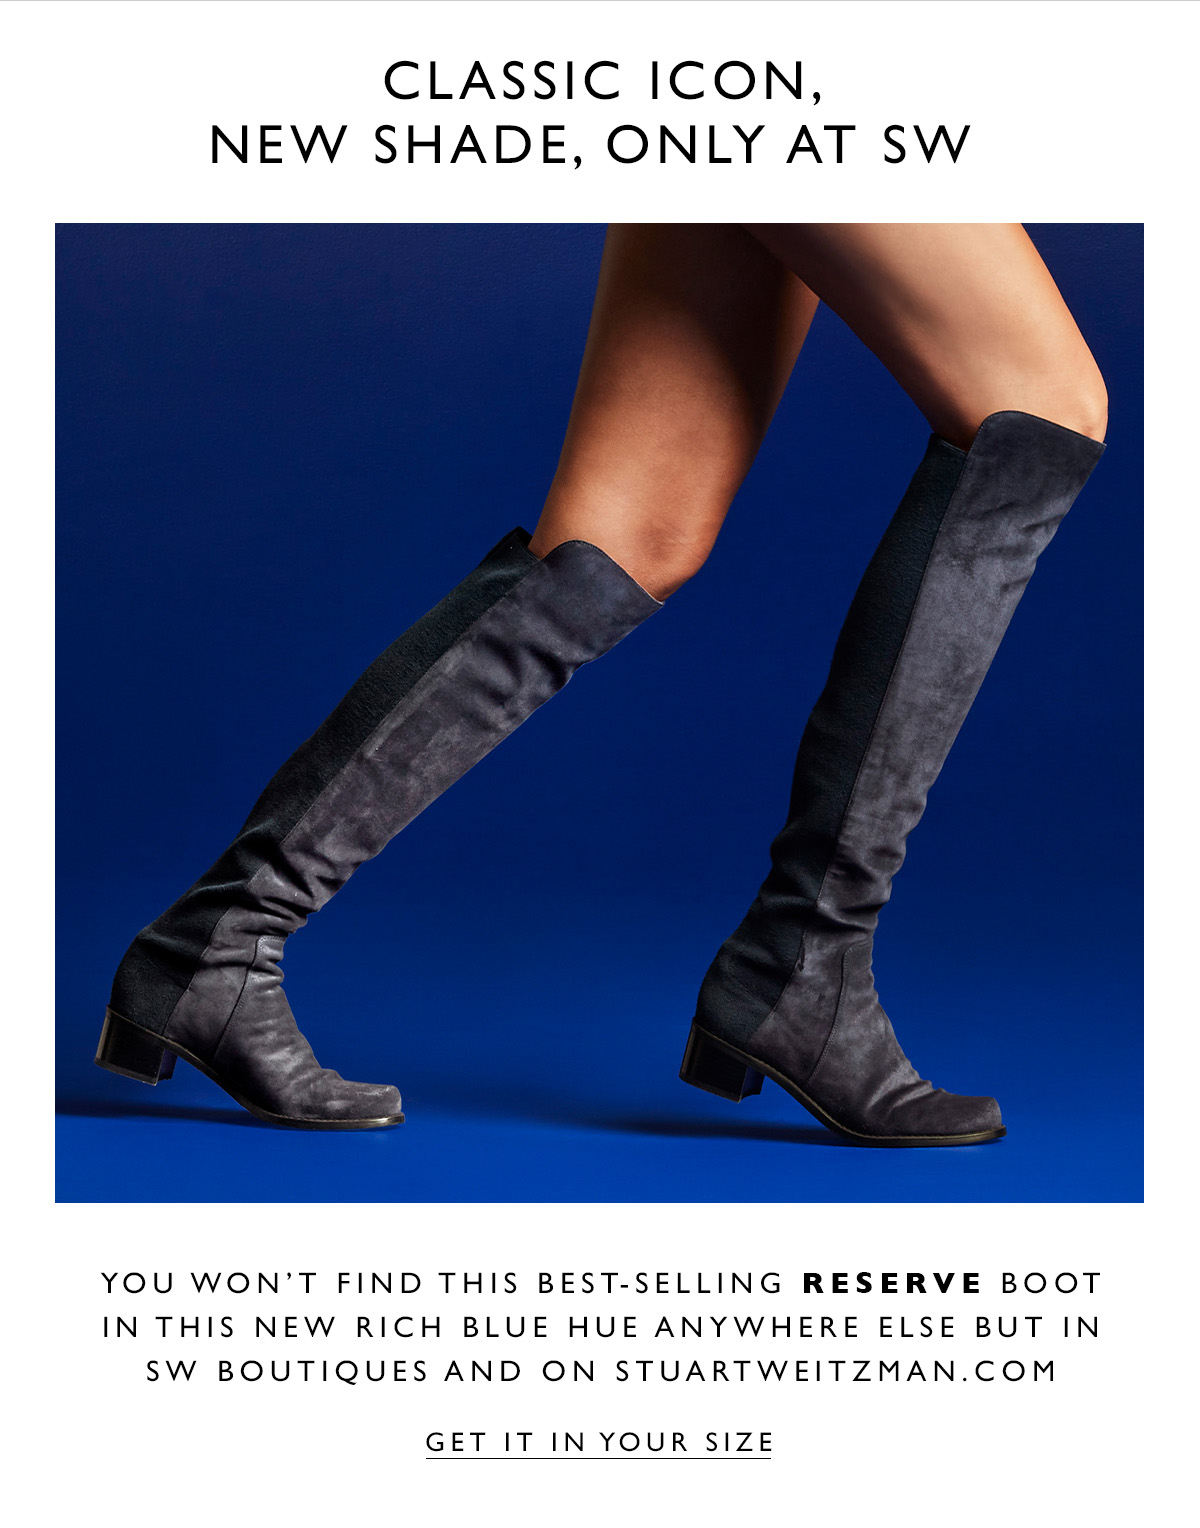 Classic Icon, New Shade, only at SW. You won't find this best-selling Reserve Boot in this new rich blue hue anywhere else but in SW boutiques and on stuartweitzman.com. GET IT IN YOUR SIZE.